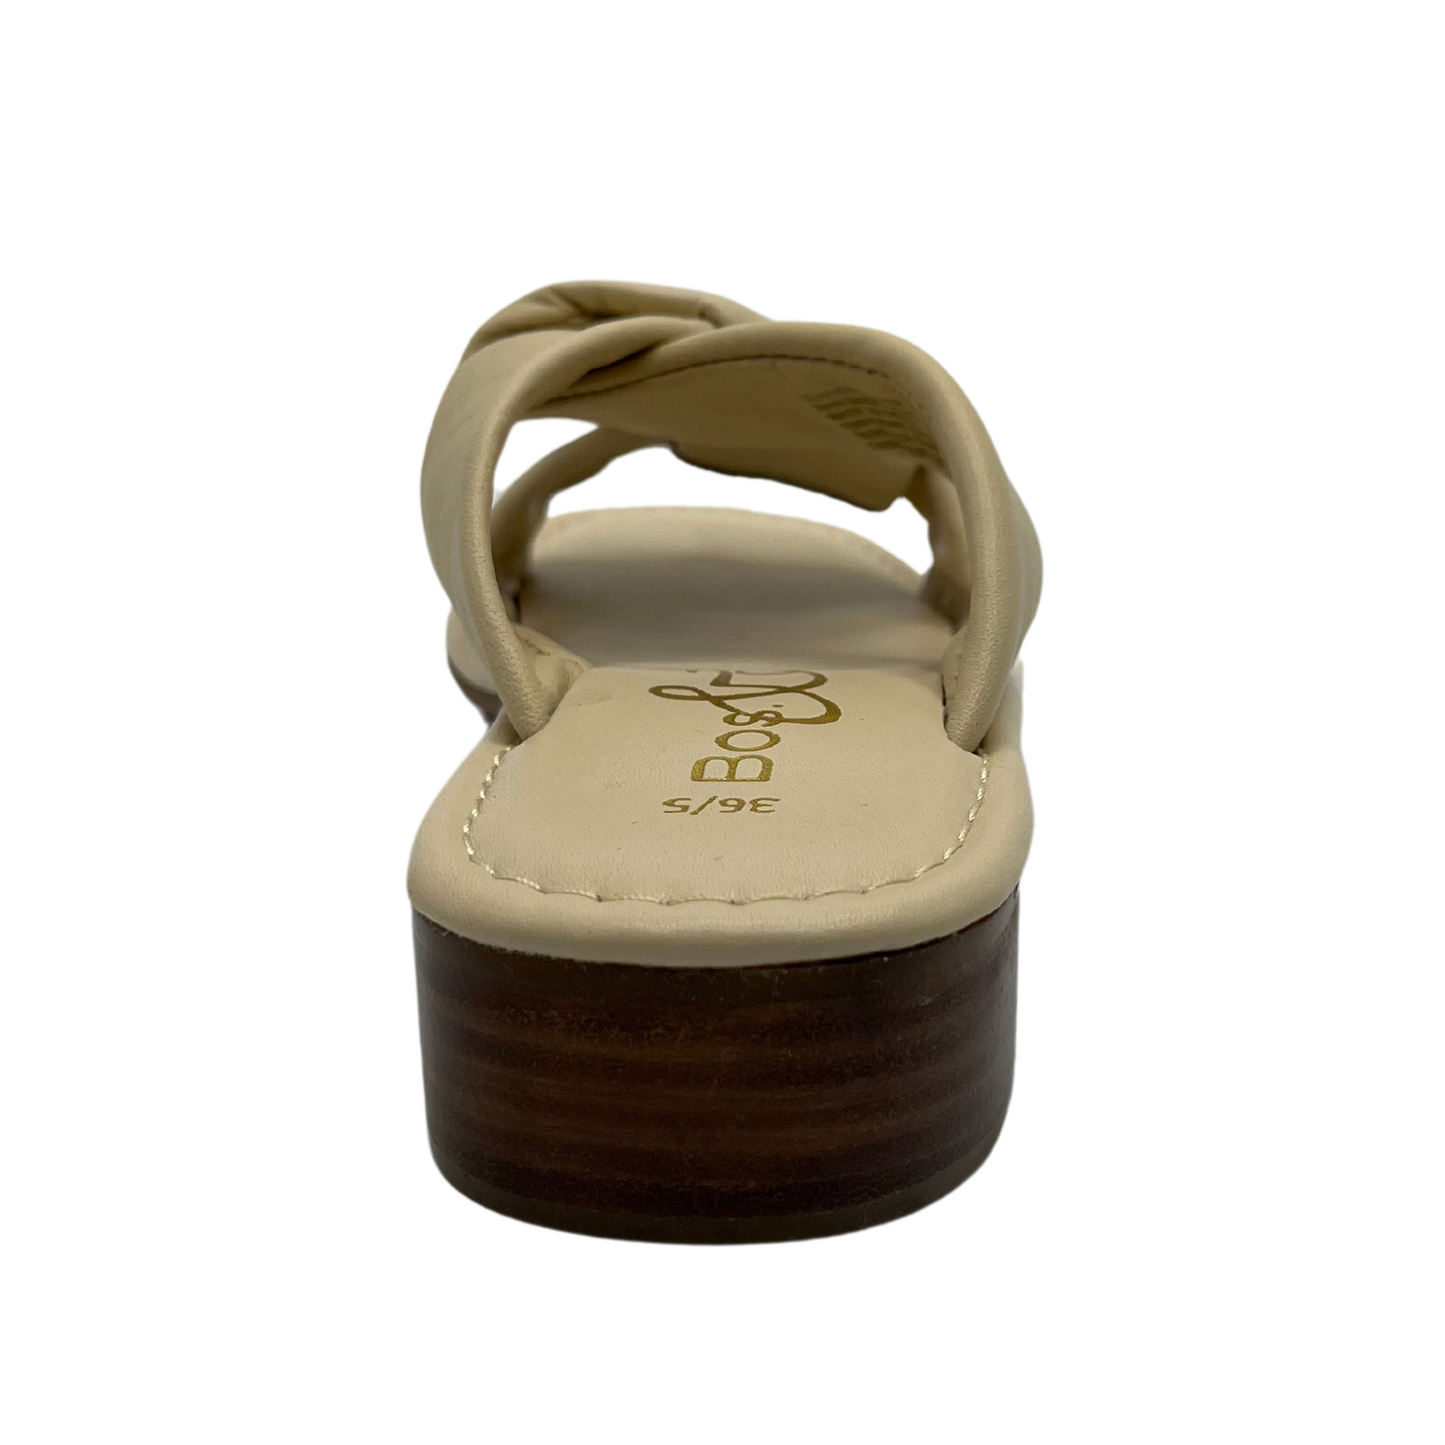 Back view of cream leather sandal with short block heel and large knot detail on straps.